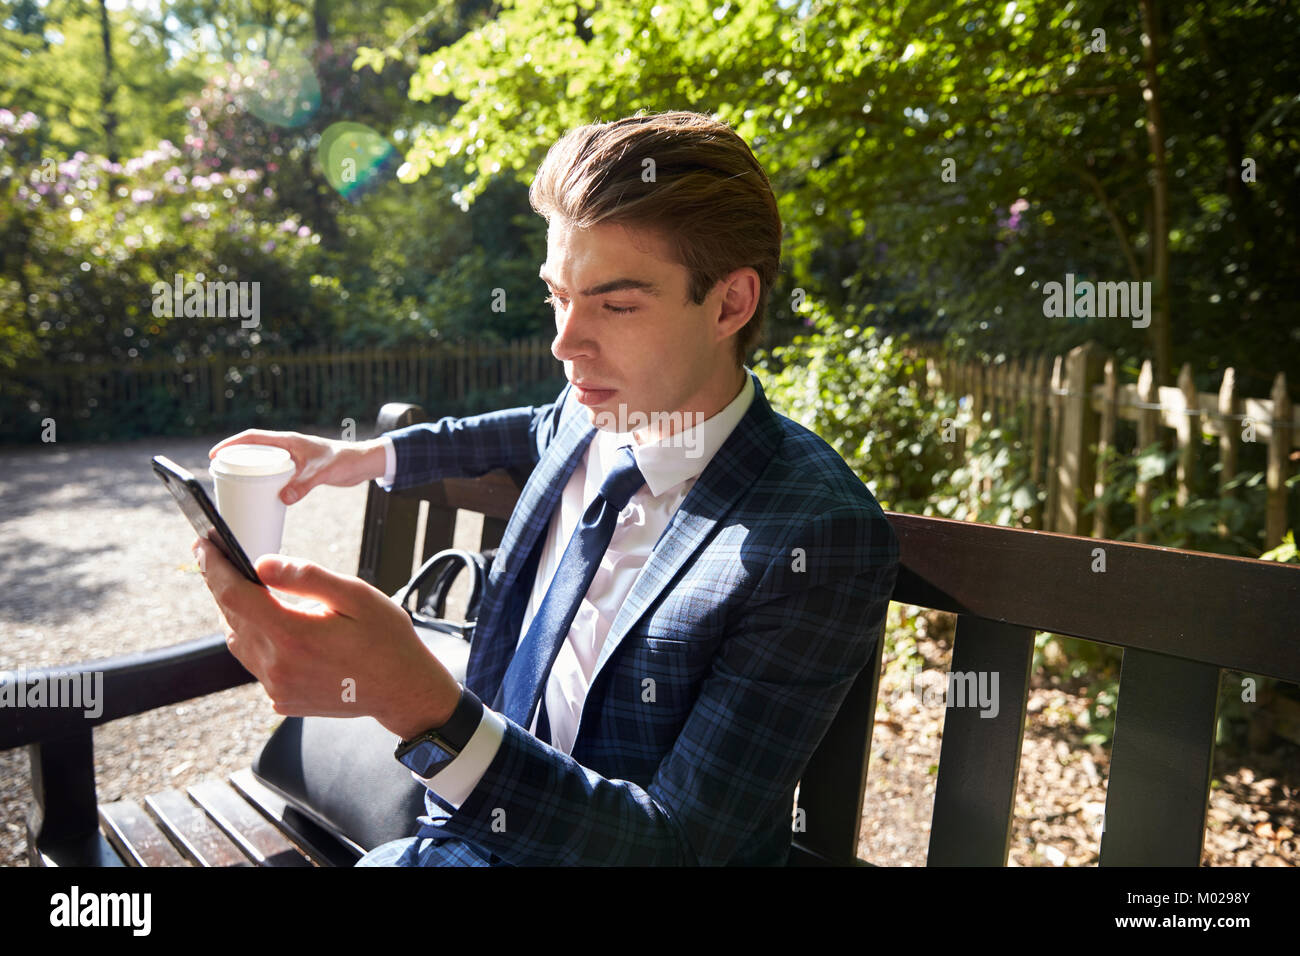 Young businessman sitting on park bench using smartphone Stock Photo